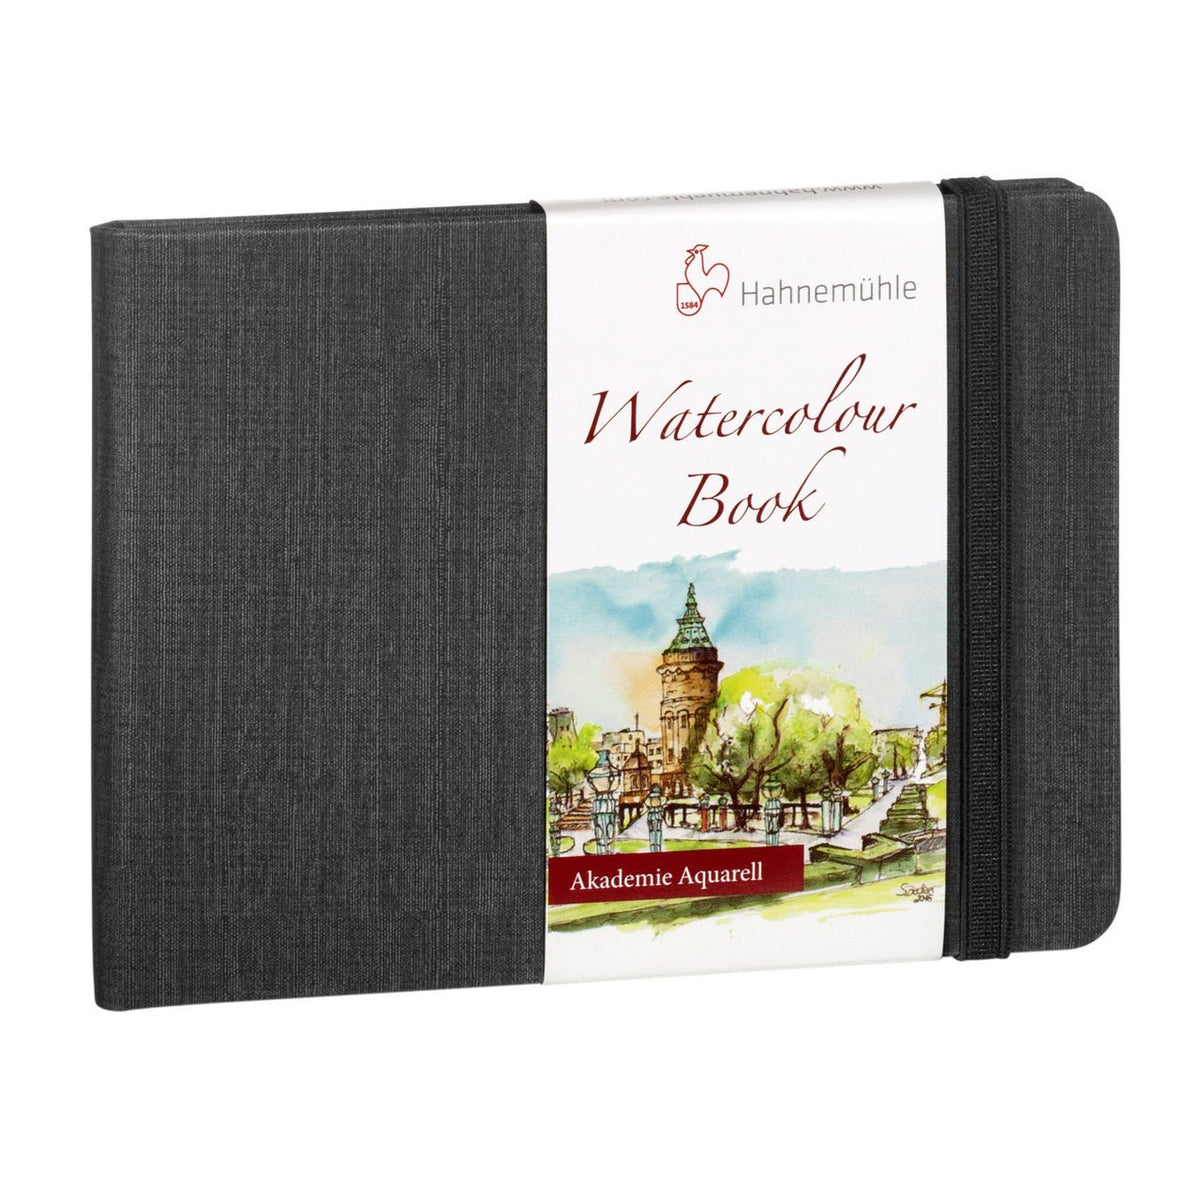 Hahnemuehle Akademie Watercolor Paper Book 4.1 inch x 5.8 inch - Landscape - merriartist.com